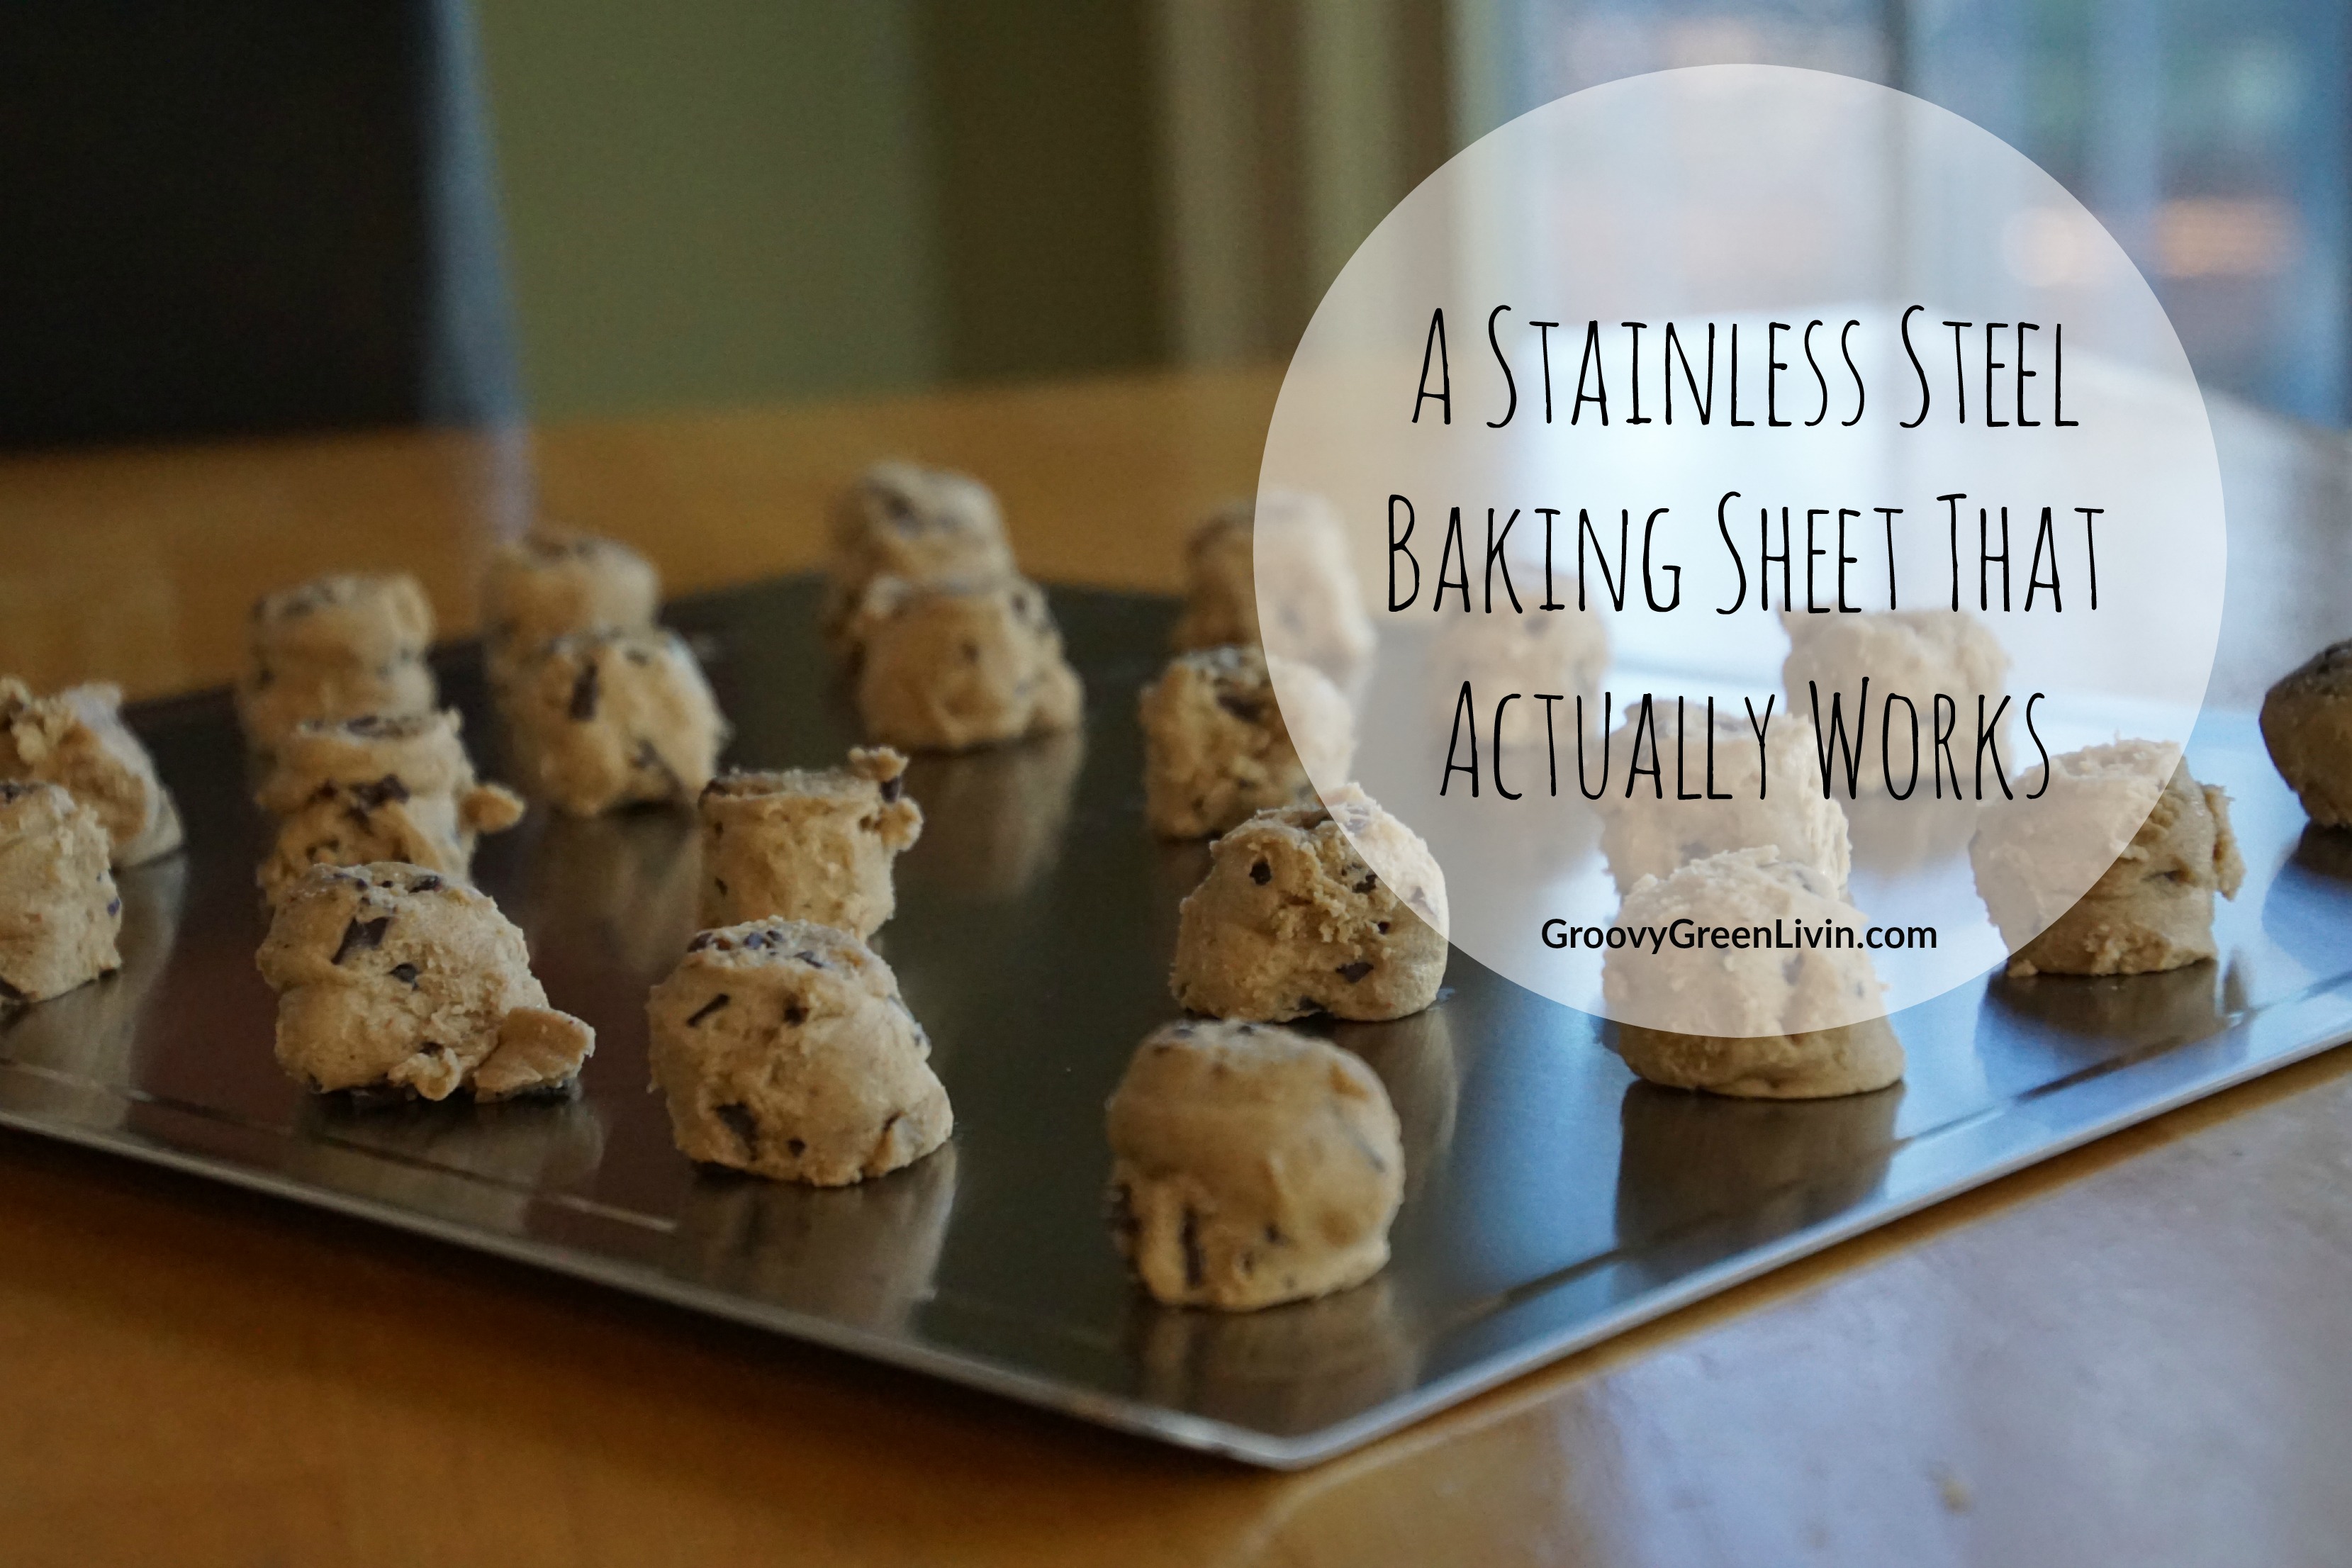 A Stainless Steel Baking Sheet That Actually Works